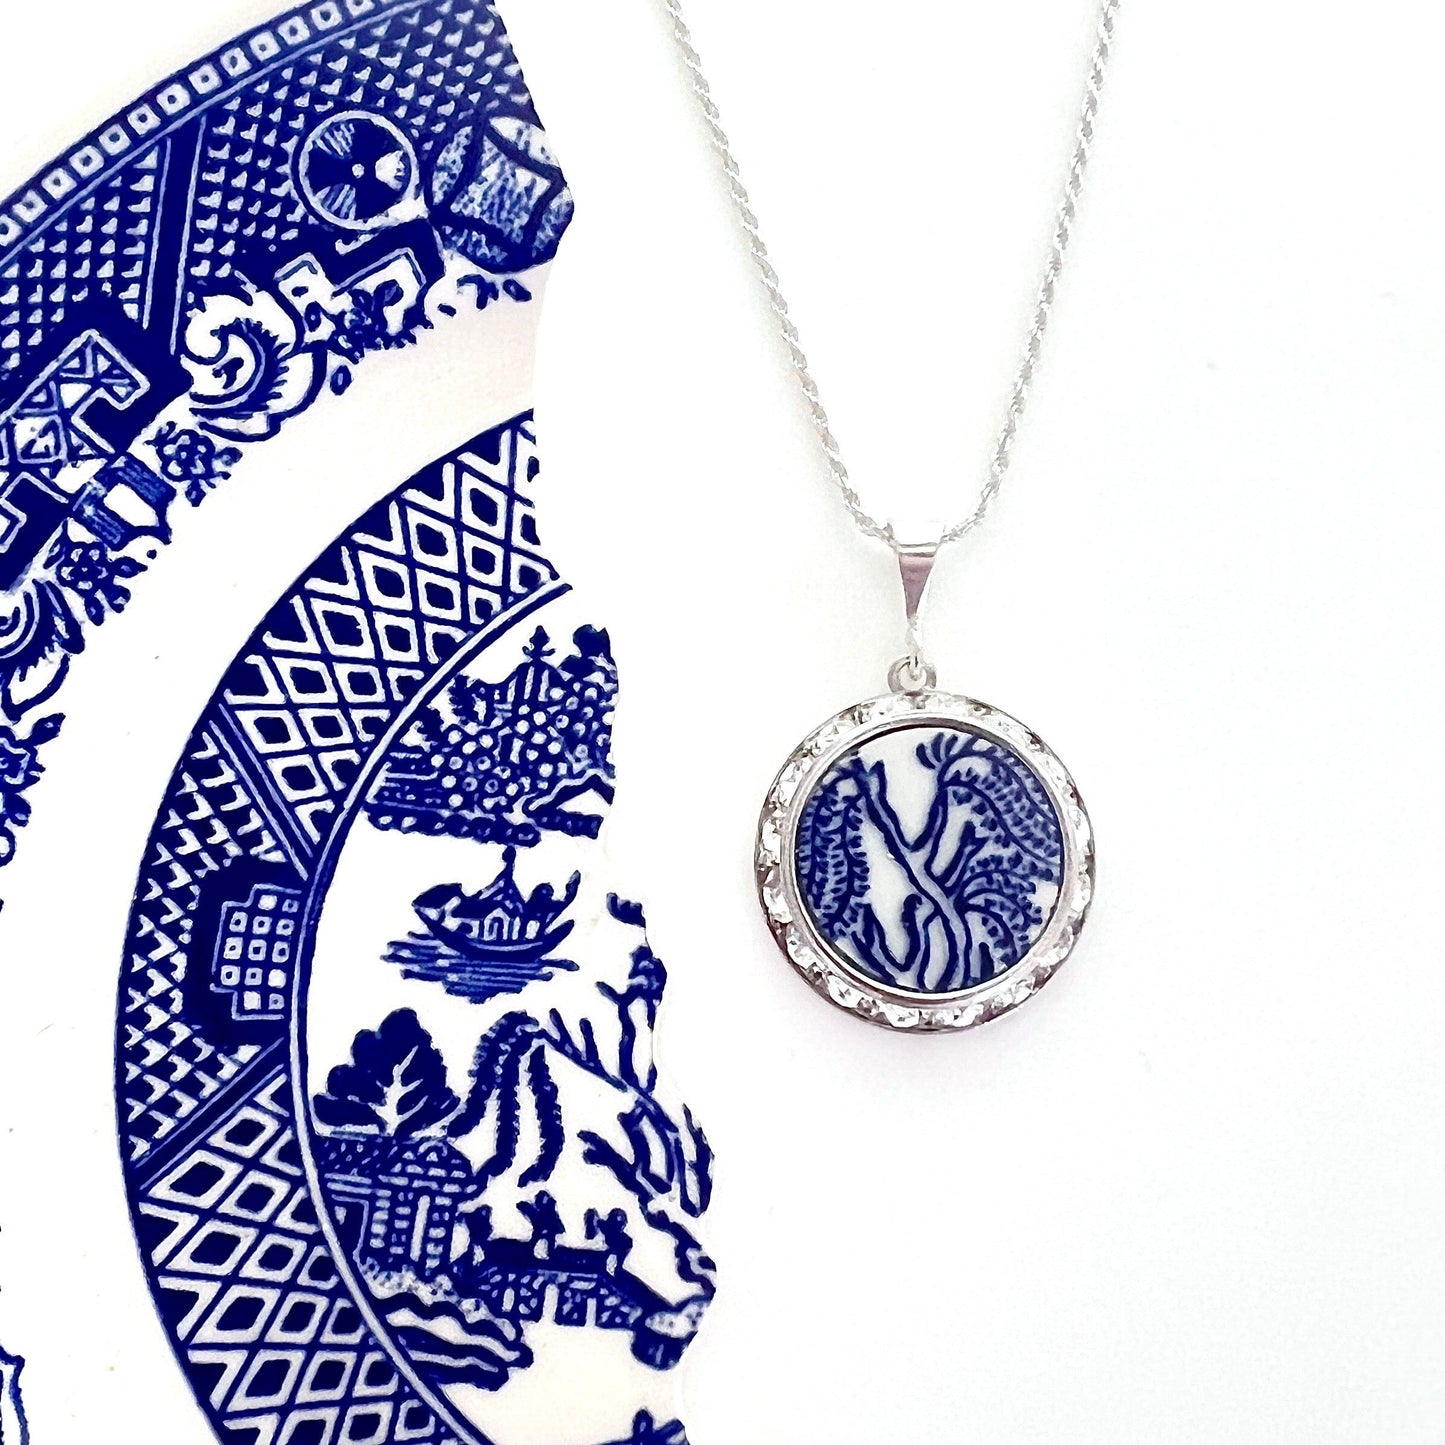 Vintage Blue Willow Crystal Necklace, Broken China Jewelry, Unique Anniversary Gifts for Wife, Willow Ware, Gifts for Women